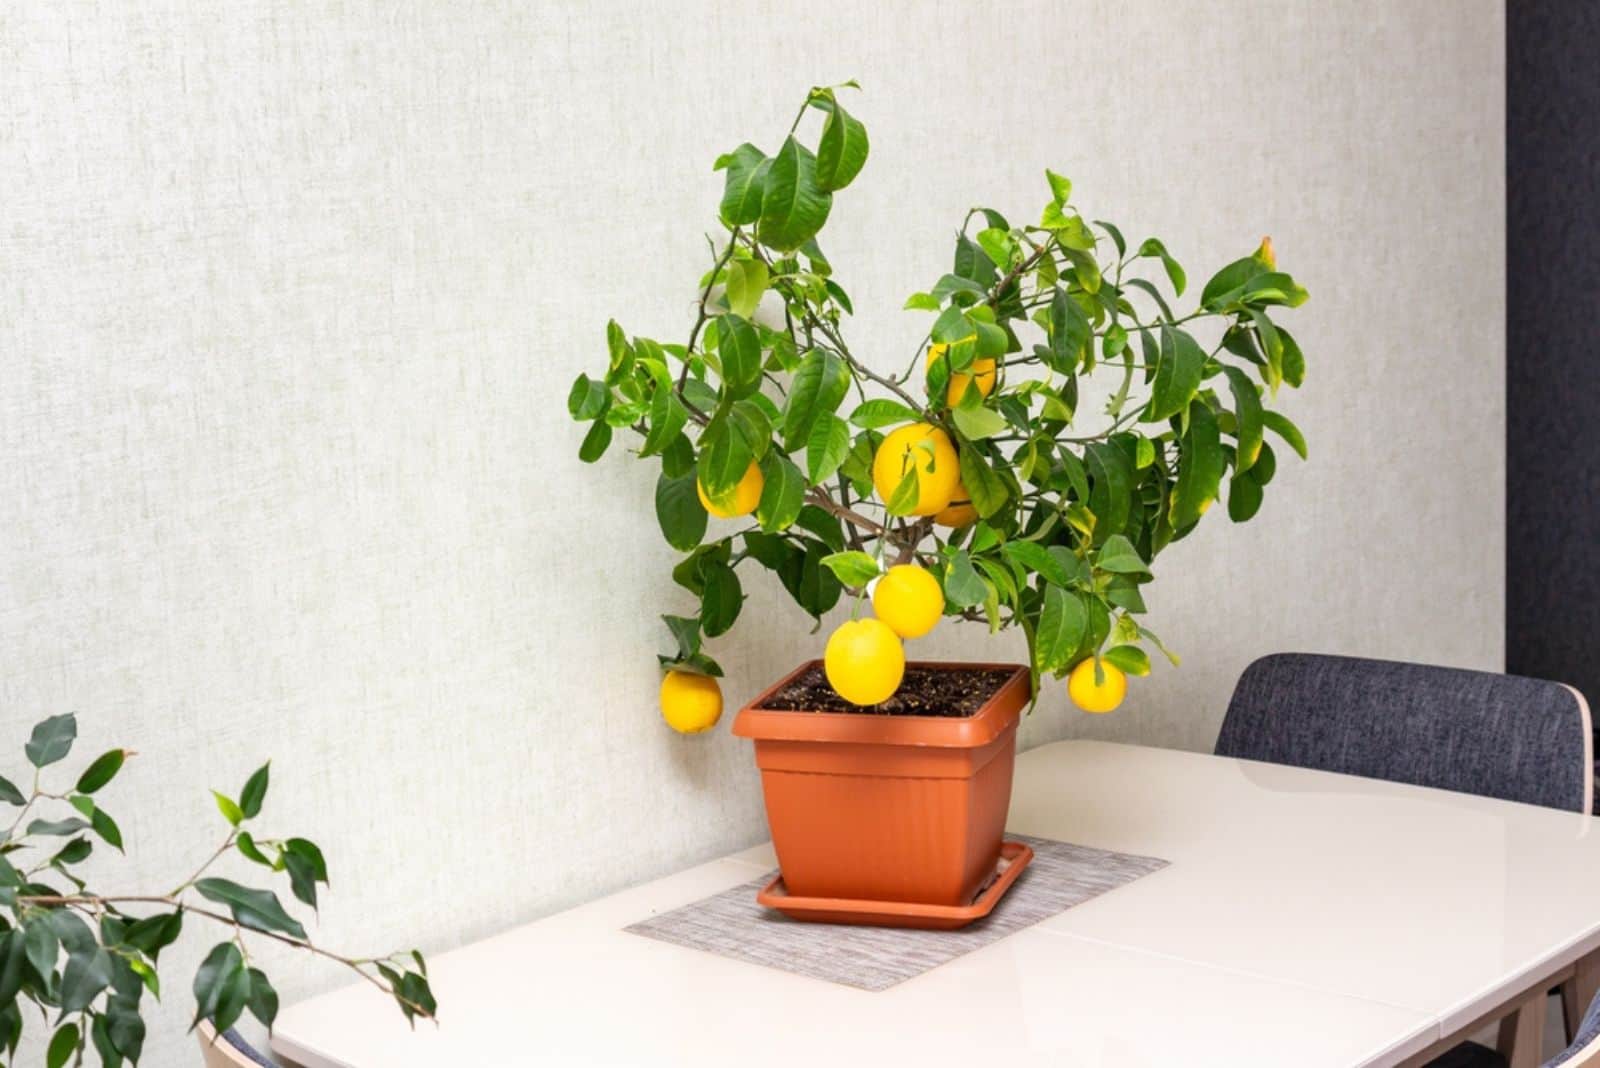 lemon tree in a pot on the table